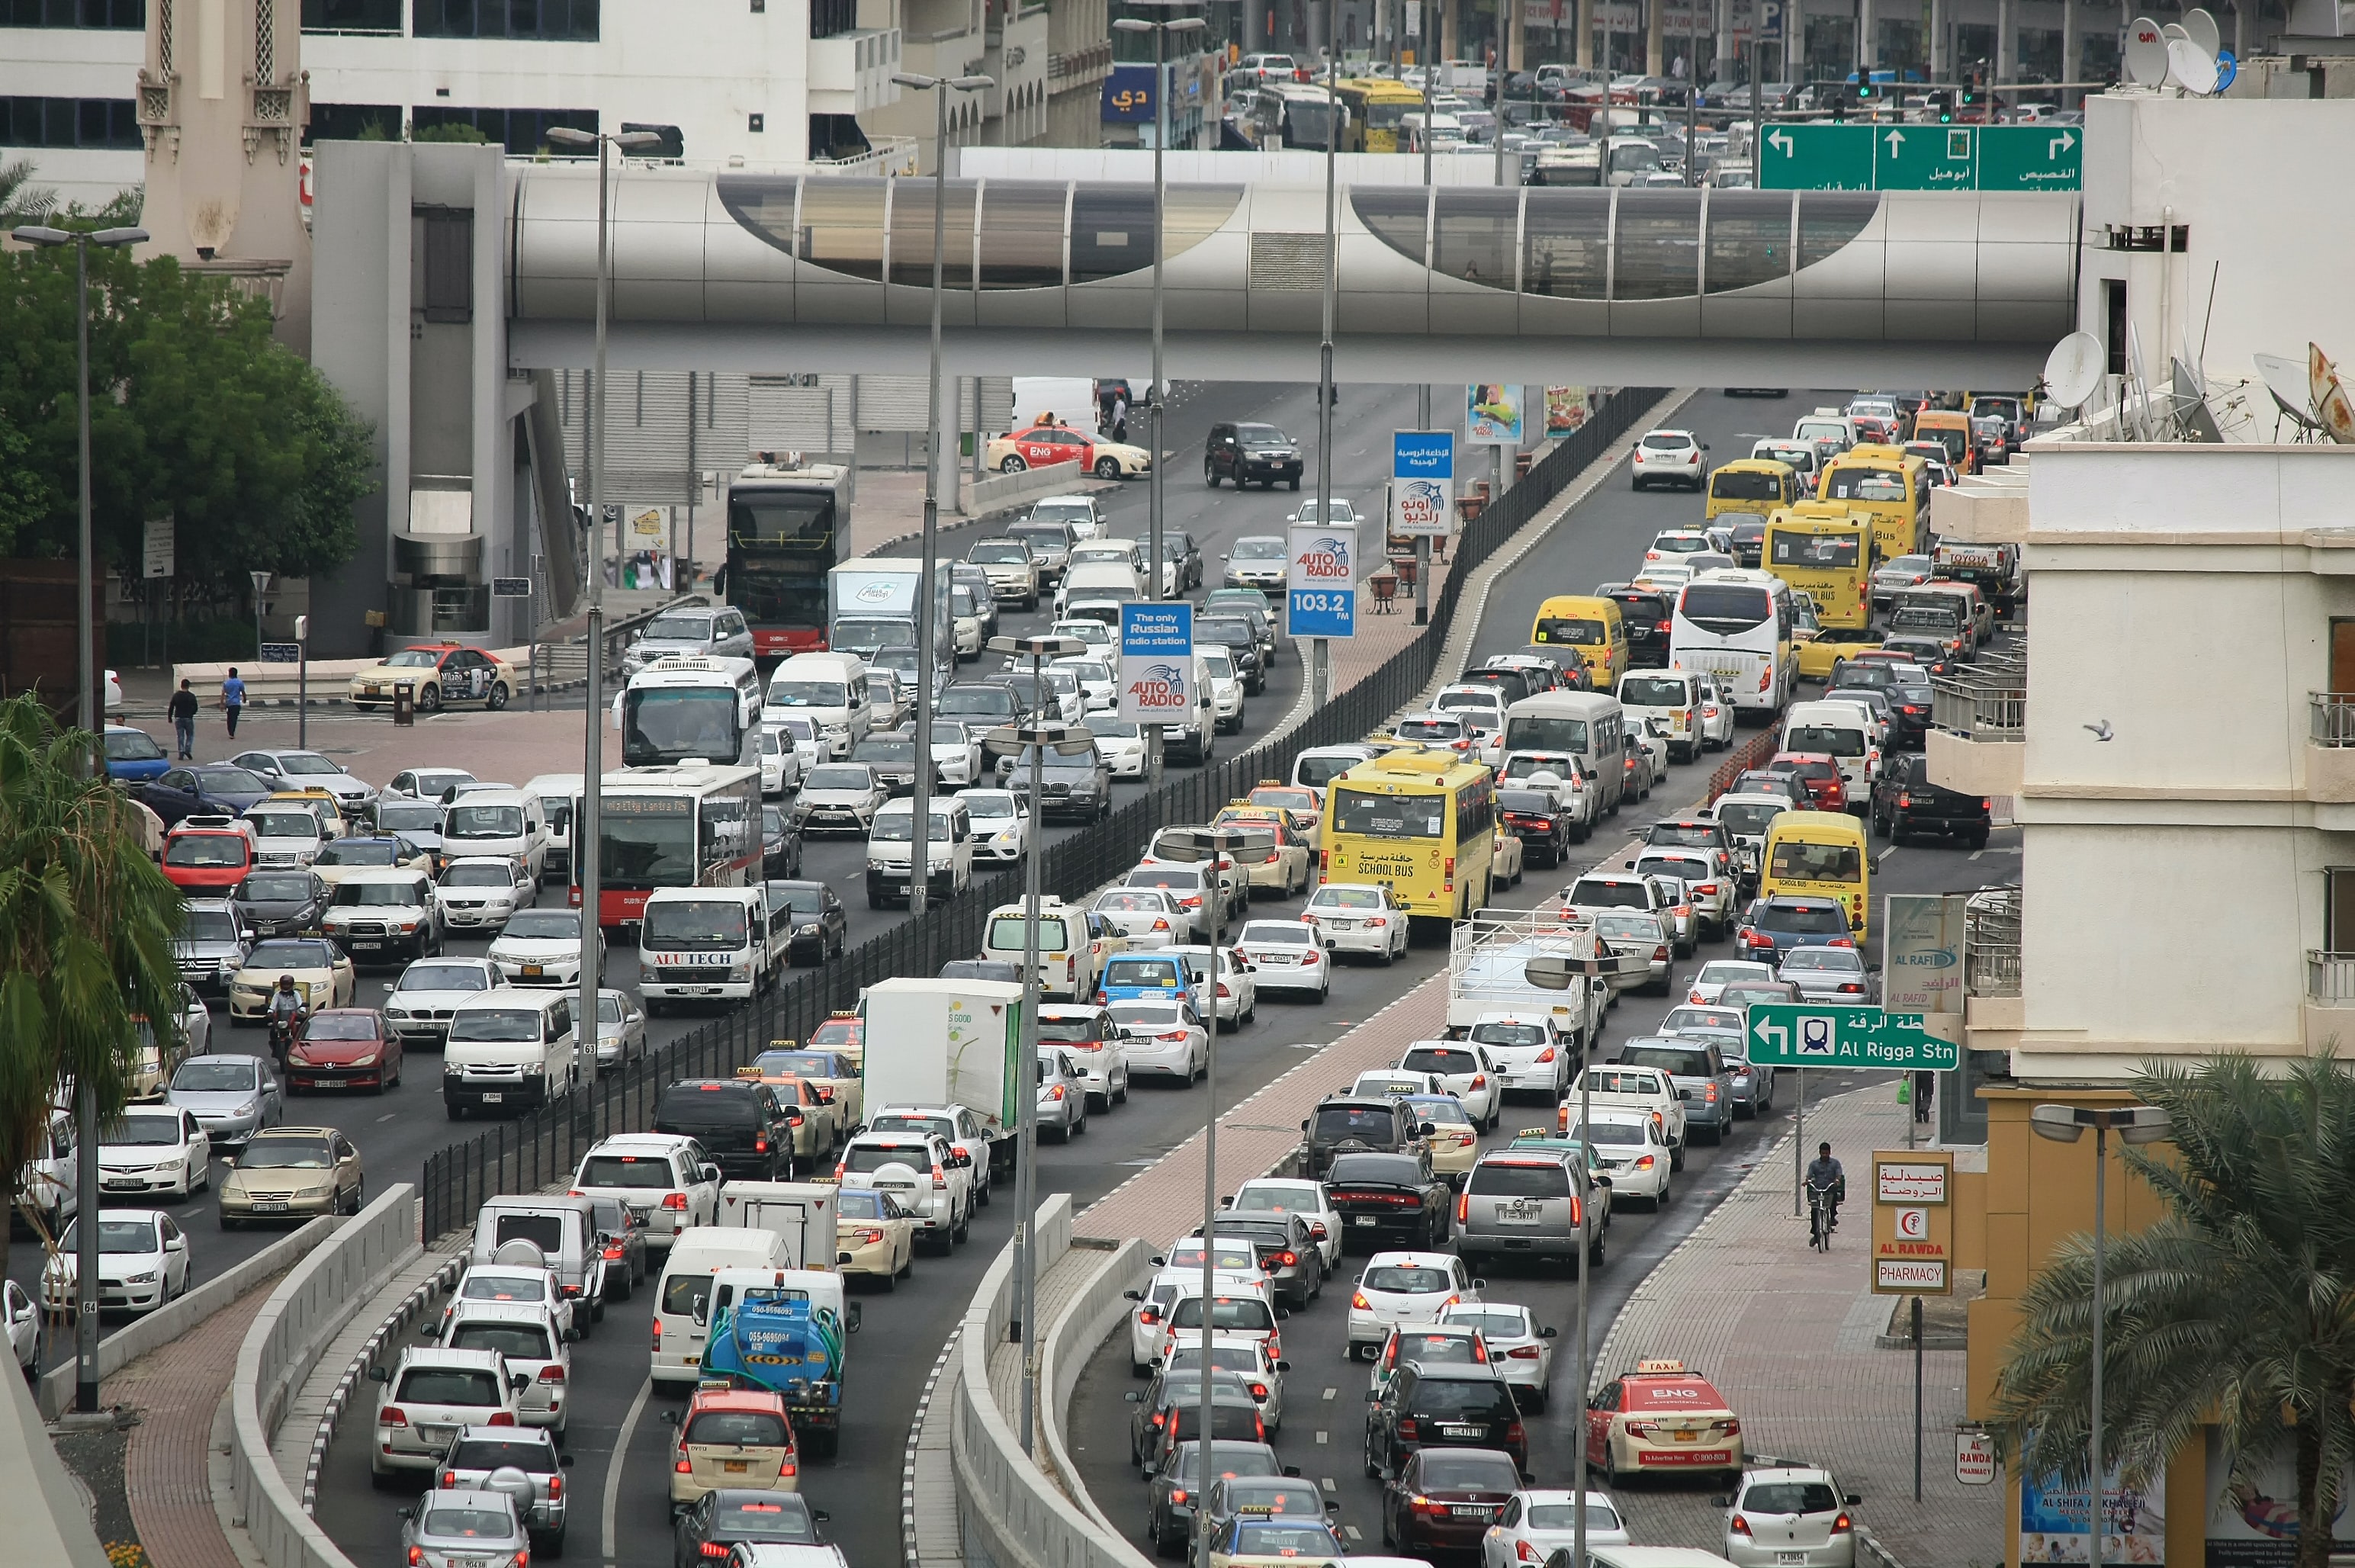 Image of traffic jam in crowded urban environment